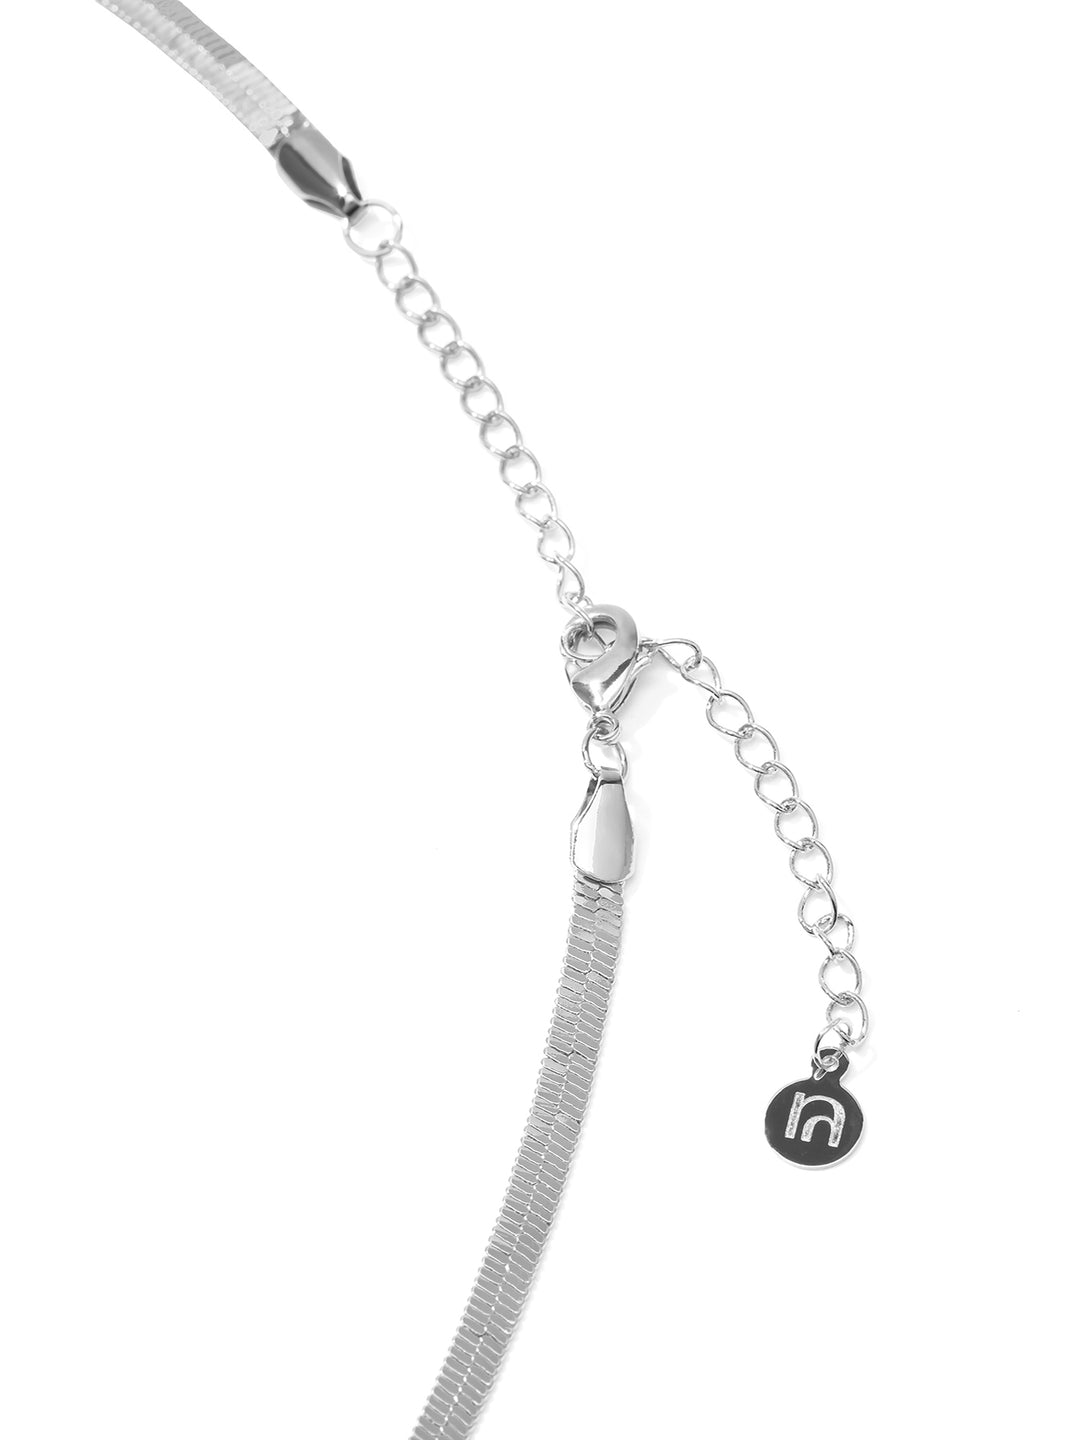 SNAKE CHAIN • Color: White Gold